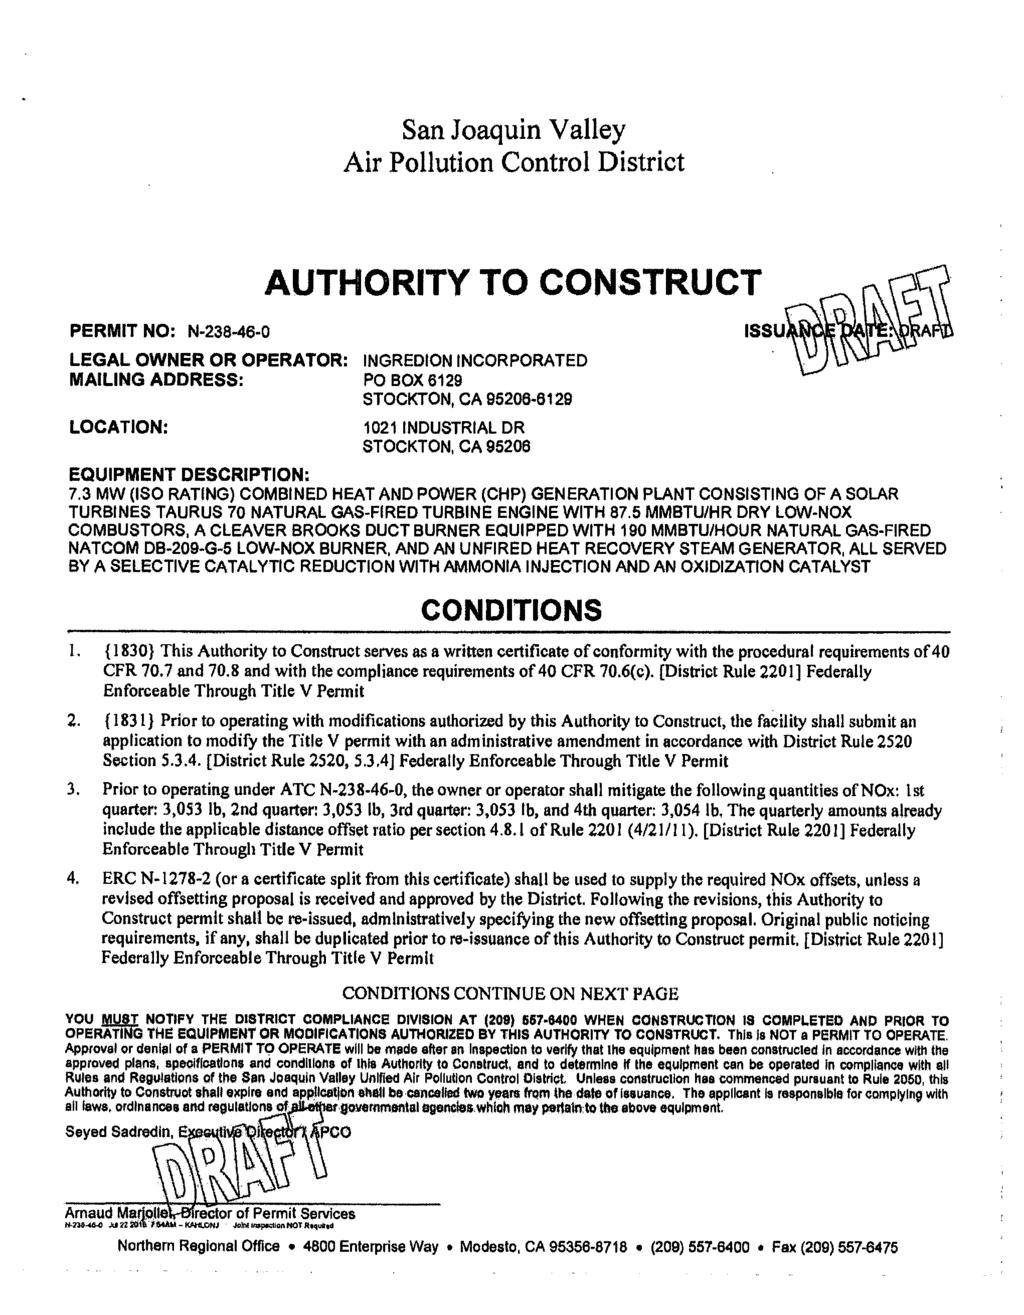 San Joaquin Valley Air Pollution Control District PERMIT NO: N-238-46-0 LEGAL OWNER OR OPERATOR: MAILING ADDRESS: LOCATION: AUTHORITY TO CONSTRUCT INGREDION INCORPORATED PO BOX 6129 STOCKTON, CA